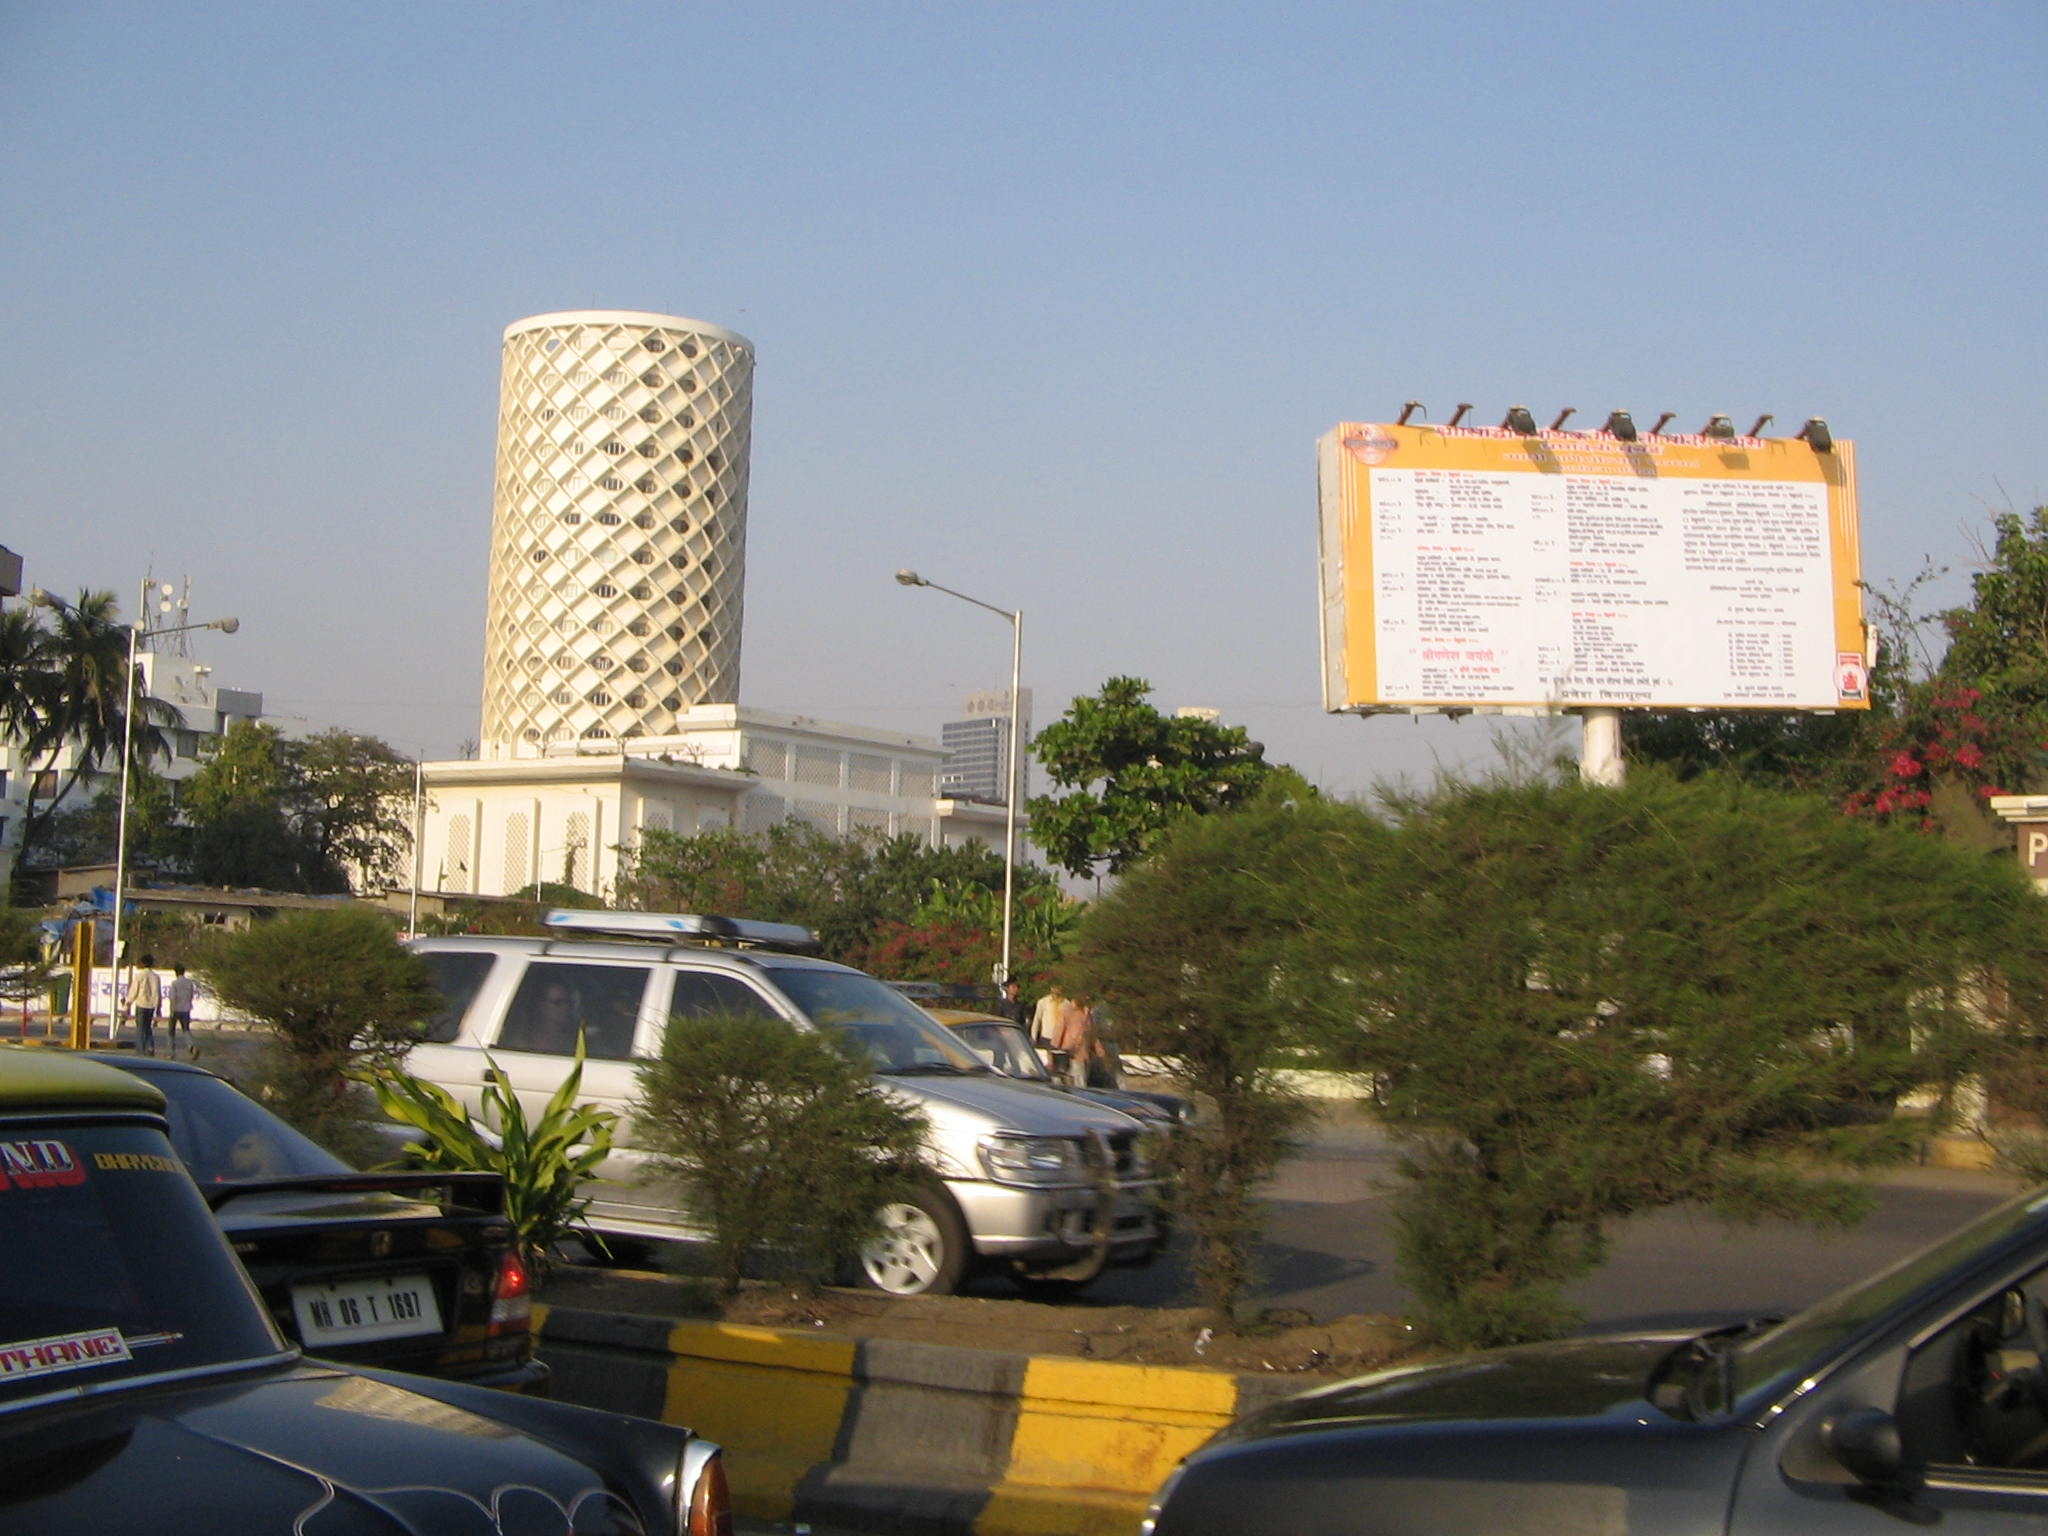 a large billboard on a building next to a parking lot with cars parked